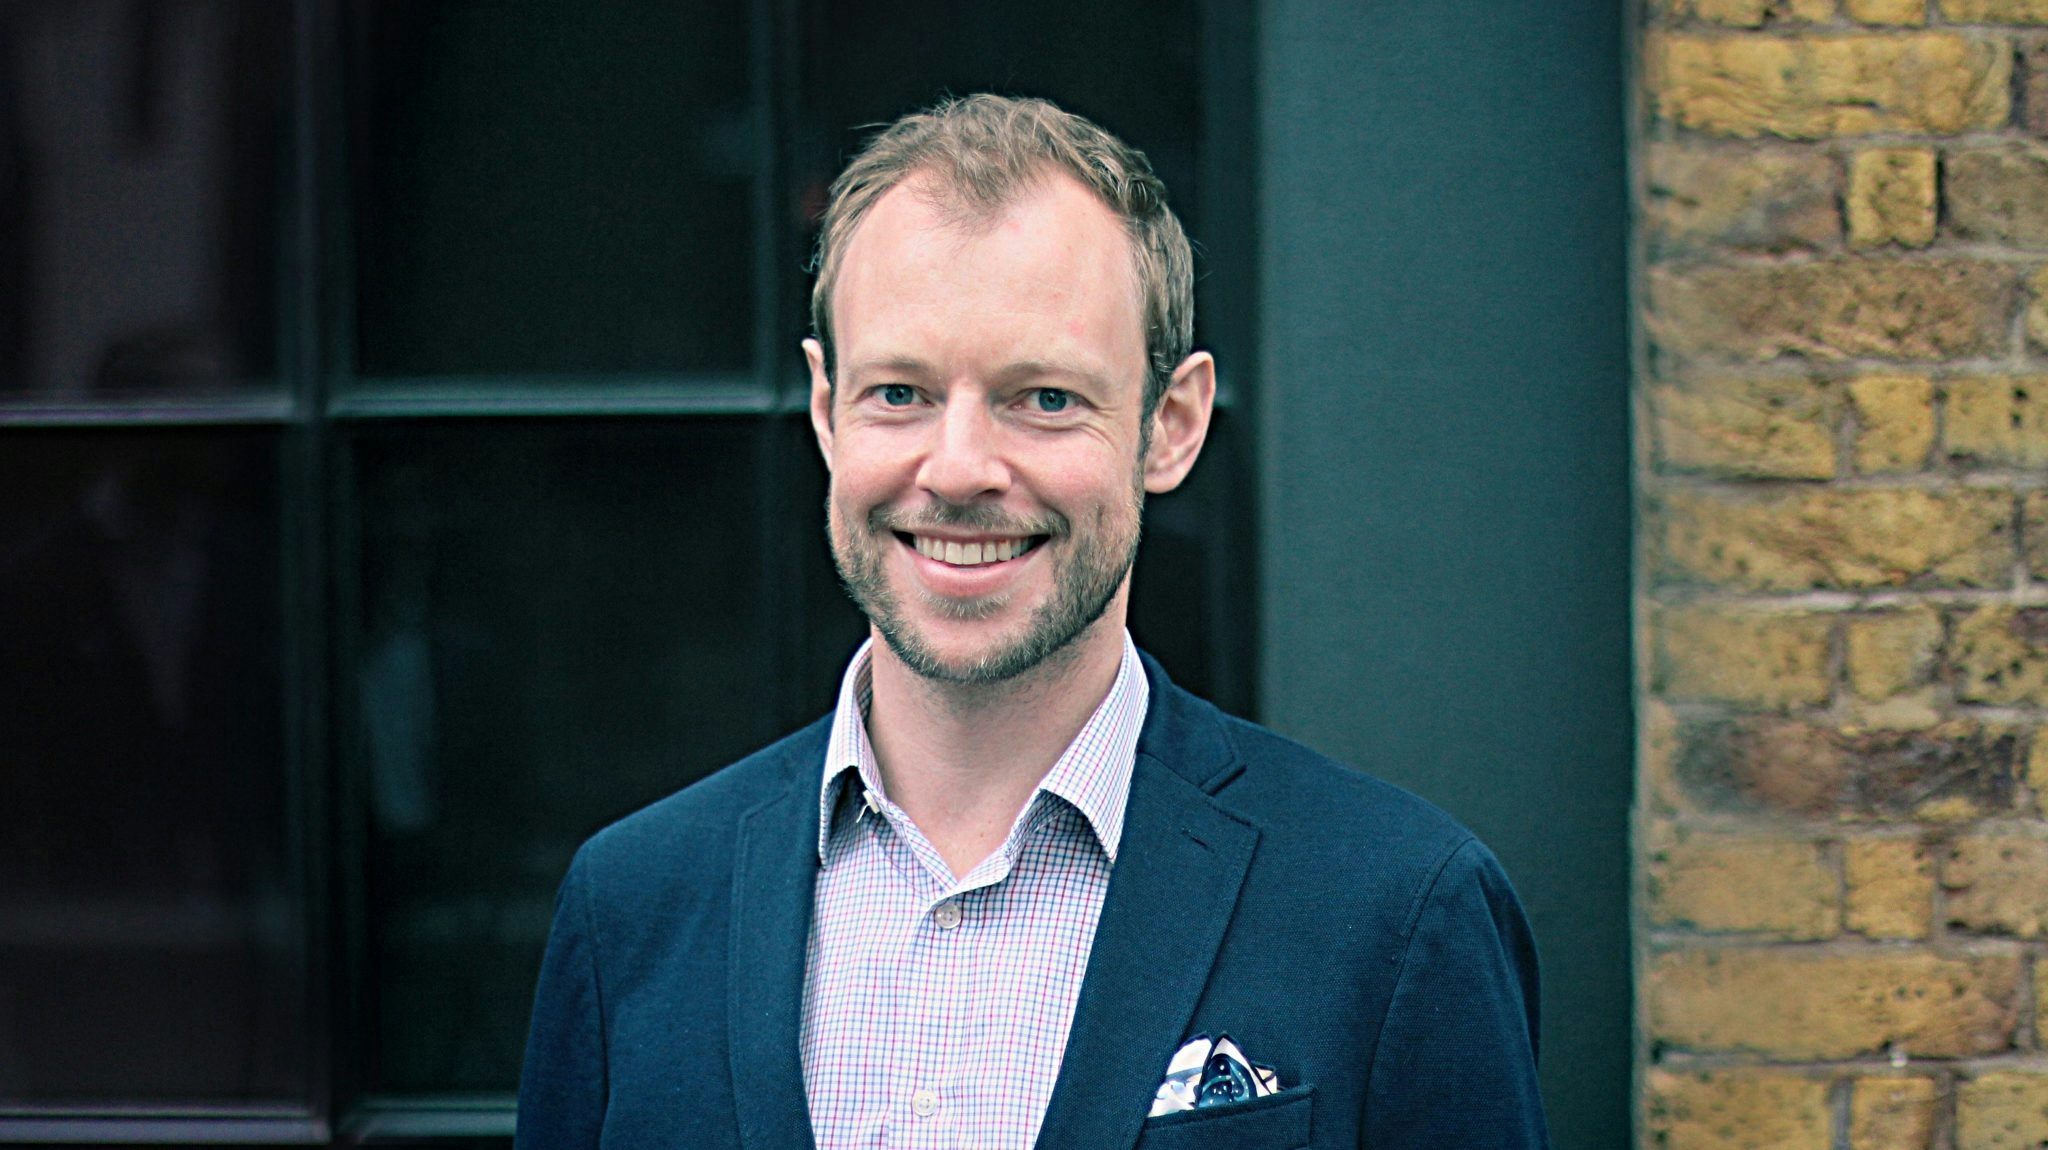 James Smith, co-founder and CEO of Elliptic